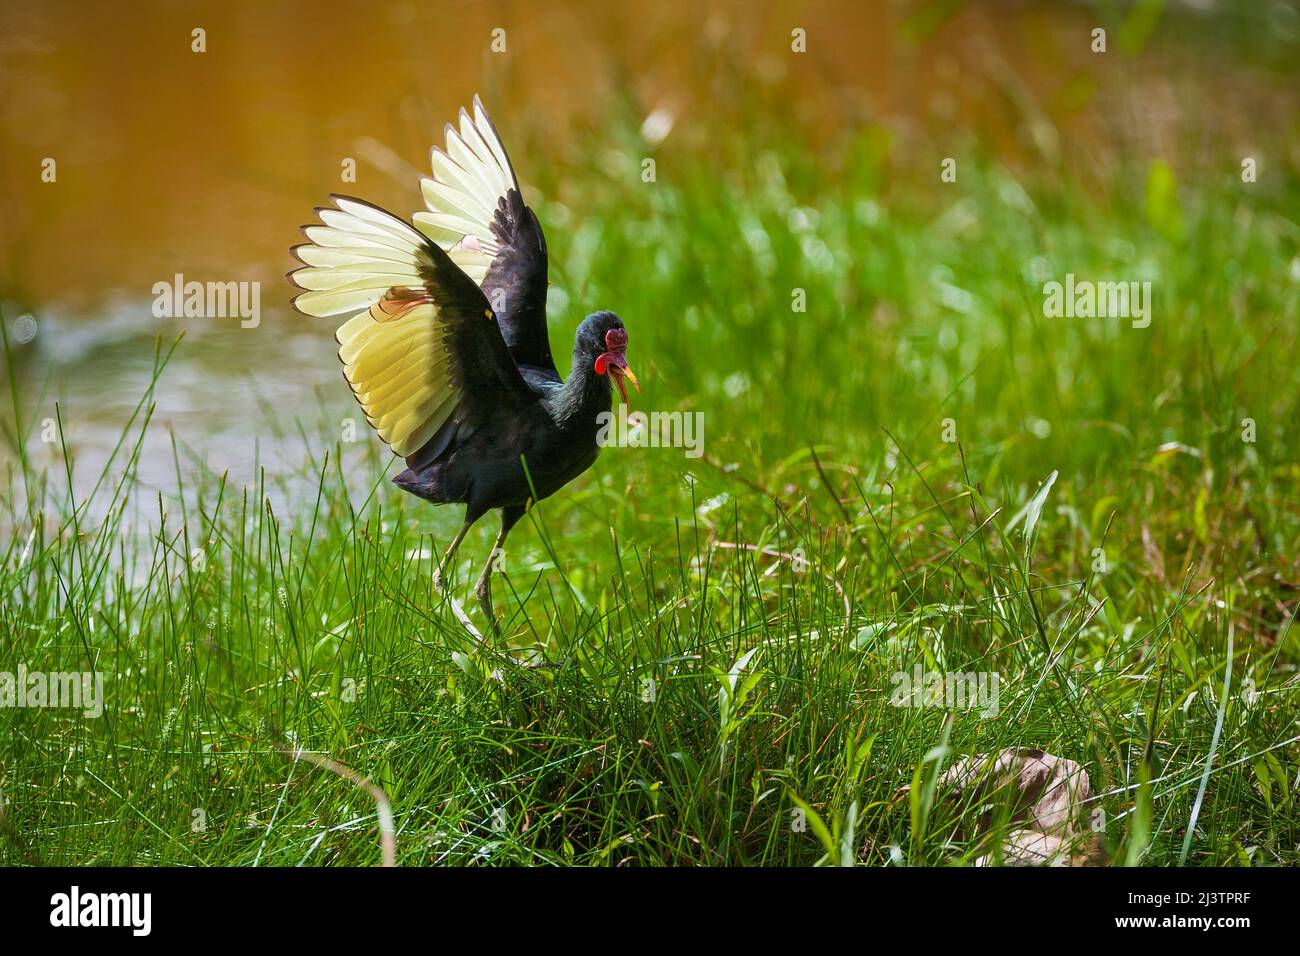 Wattled jacana, Jacana jacana, in flight near a pond in Coclecito, Cocle province, Republic of Panama, Central America. Stock Photo